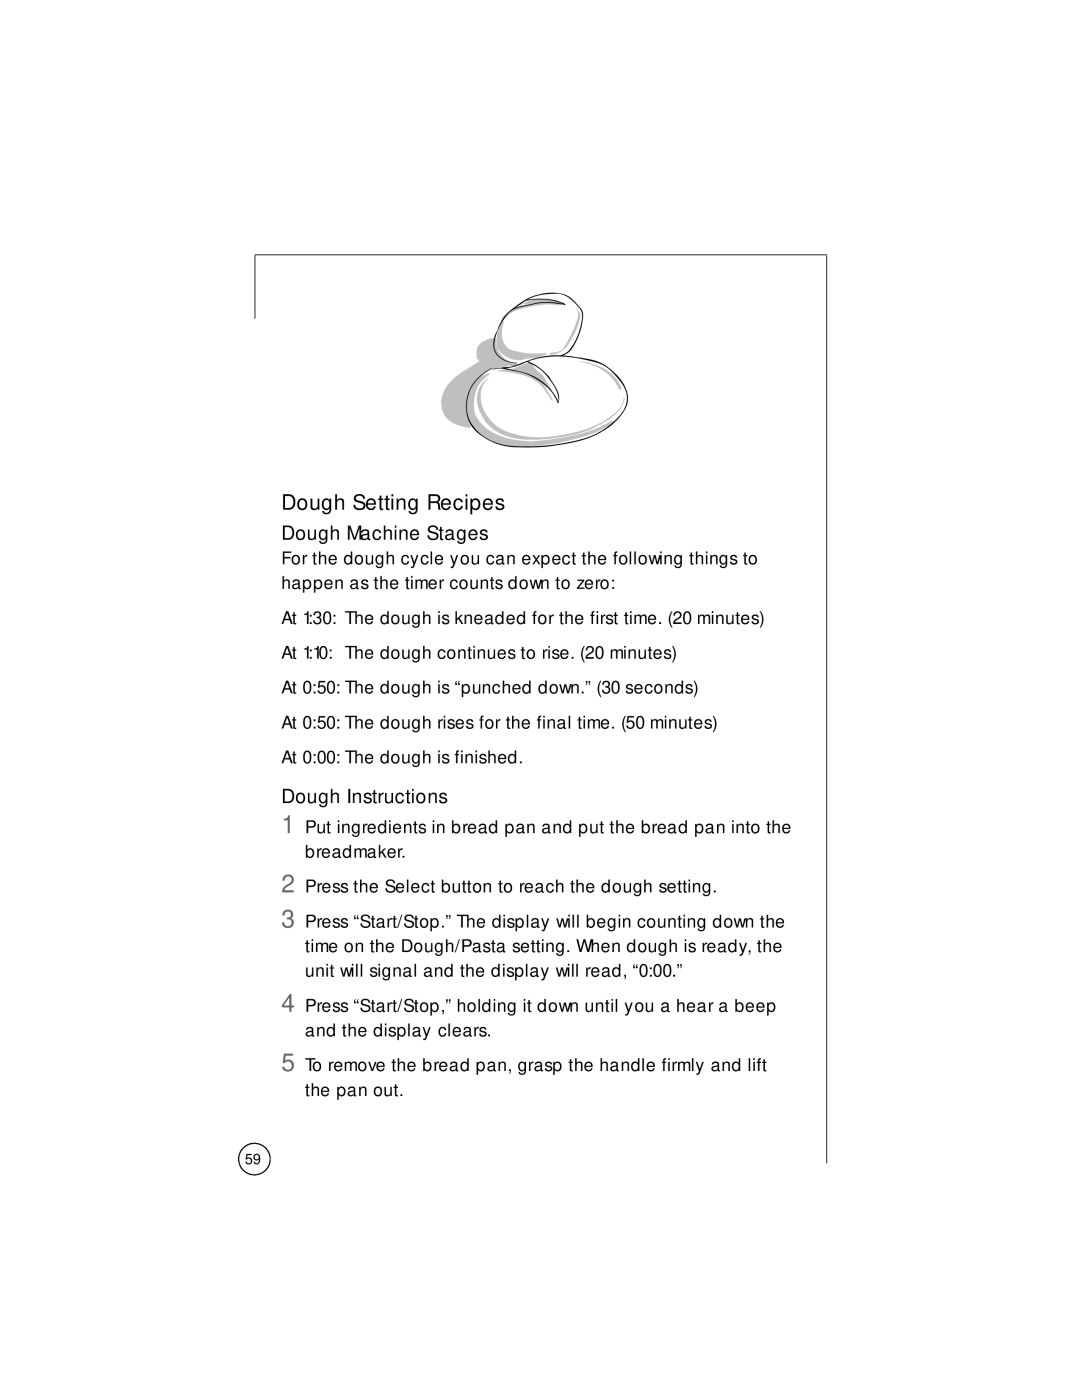 Oster Bread Maker user manual Dough Setting Recipes, Dough Machine Stages, Dough Instructions 